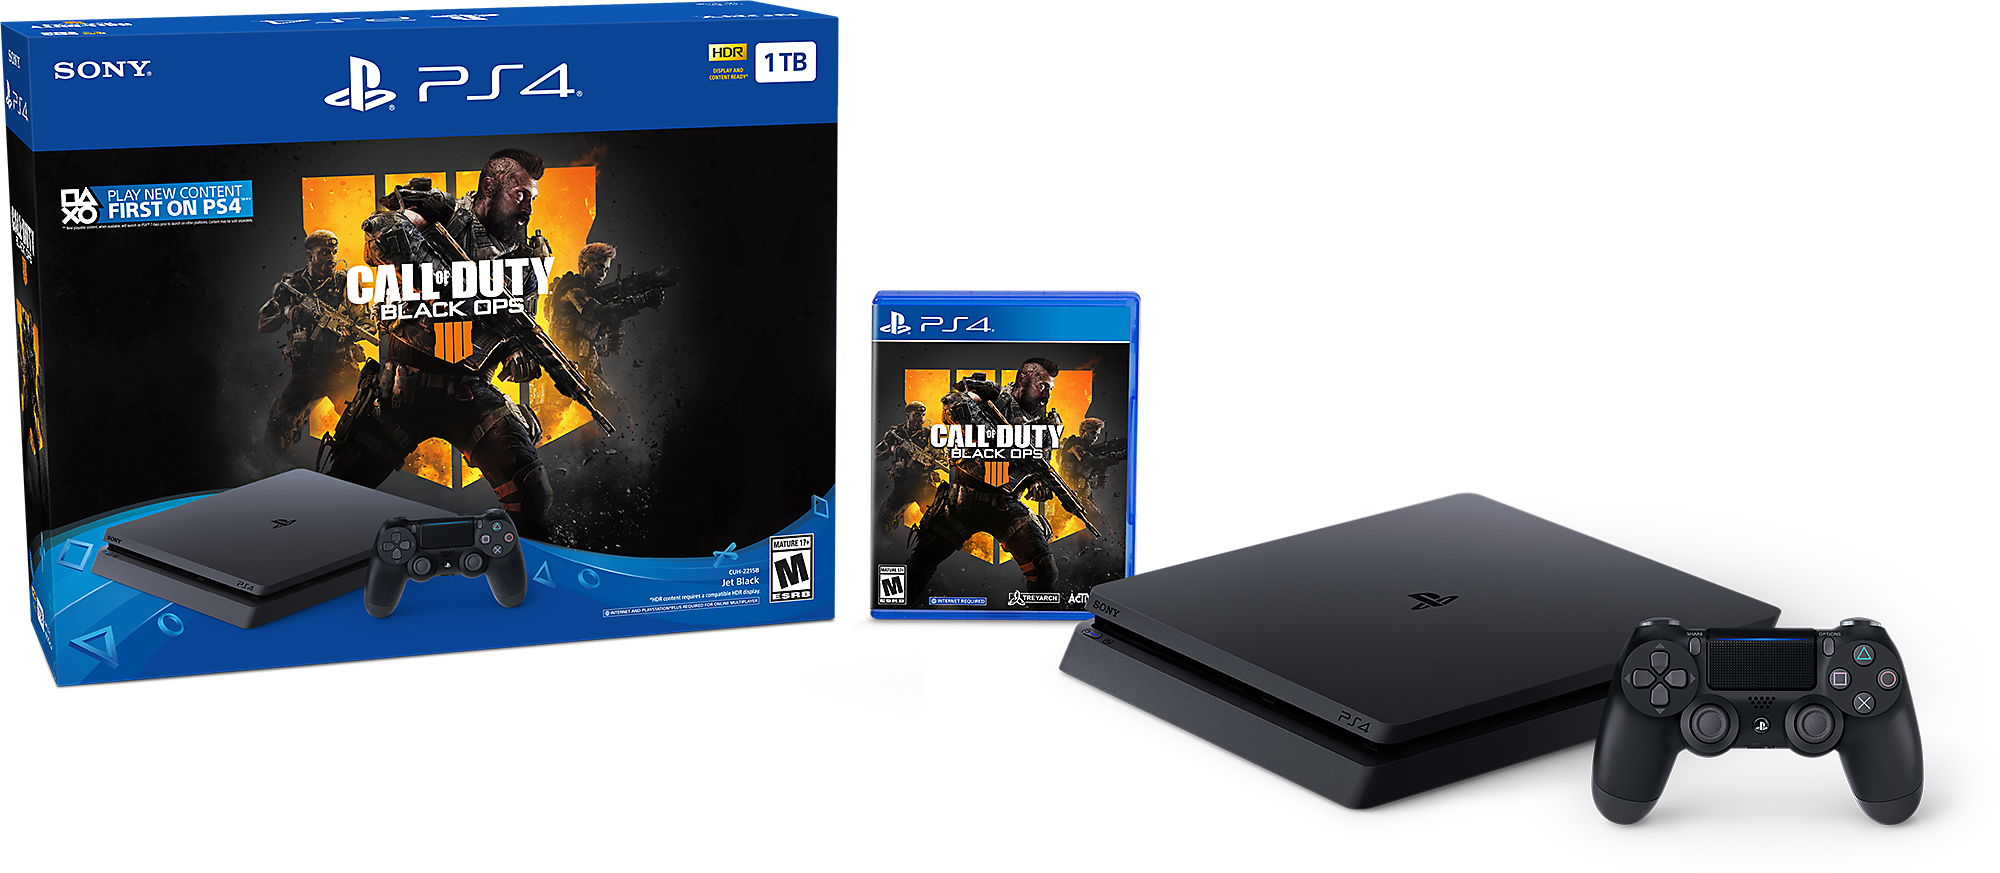 Call of Duty: Black Ops 4 PlayStation 4 Bundle Product Shot